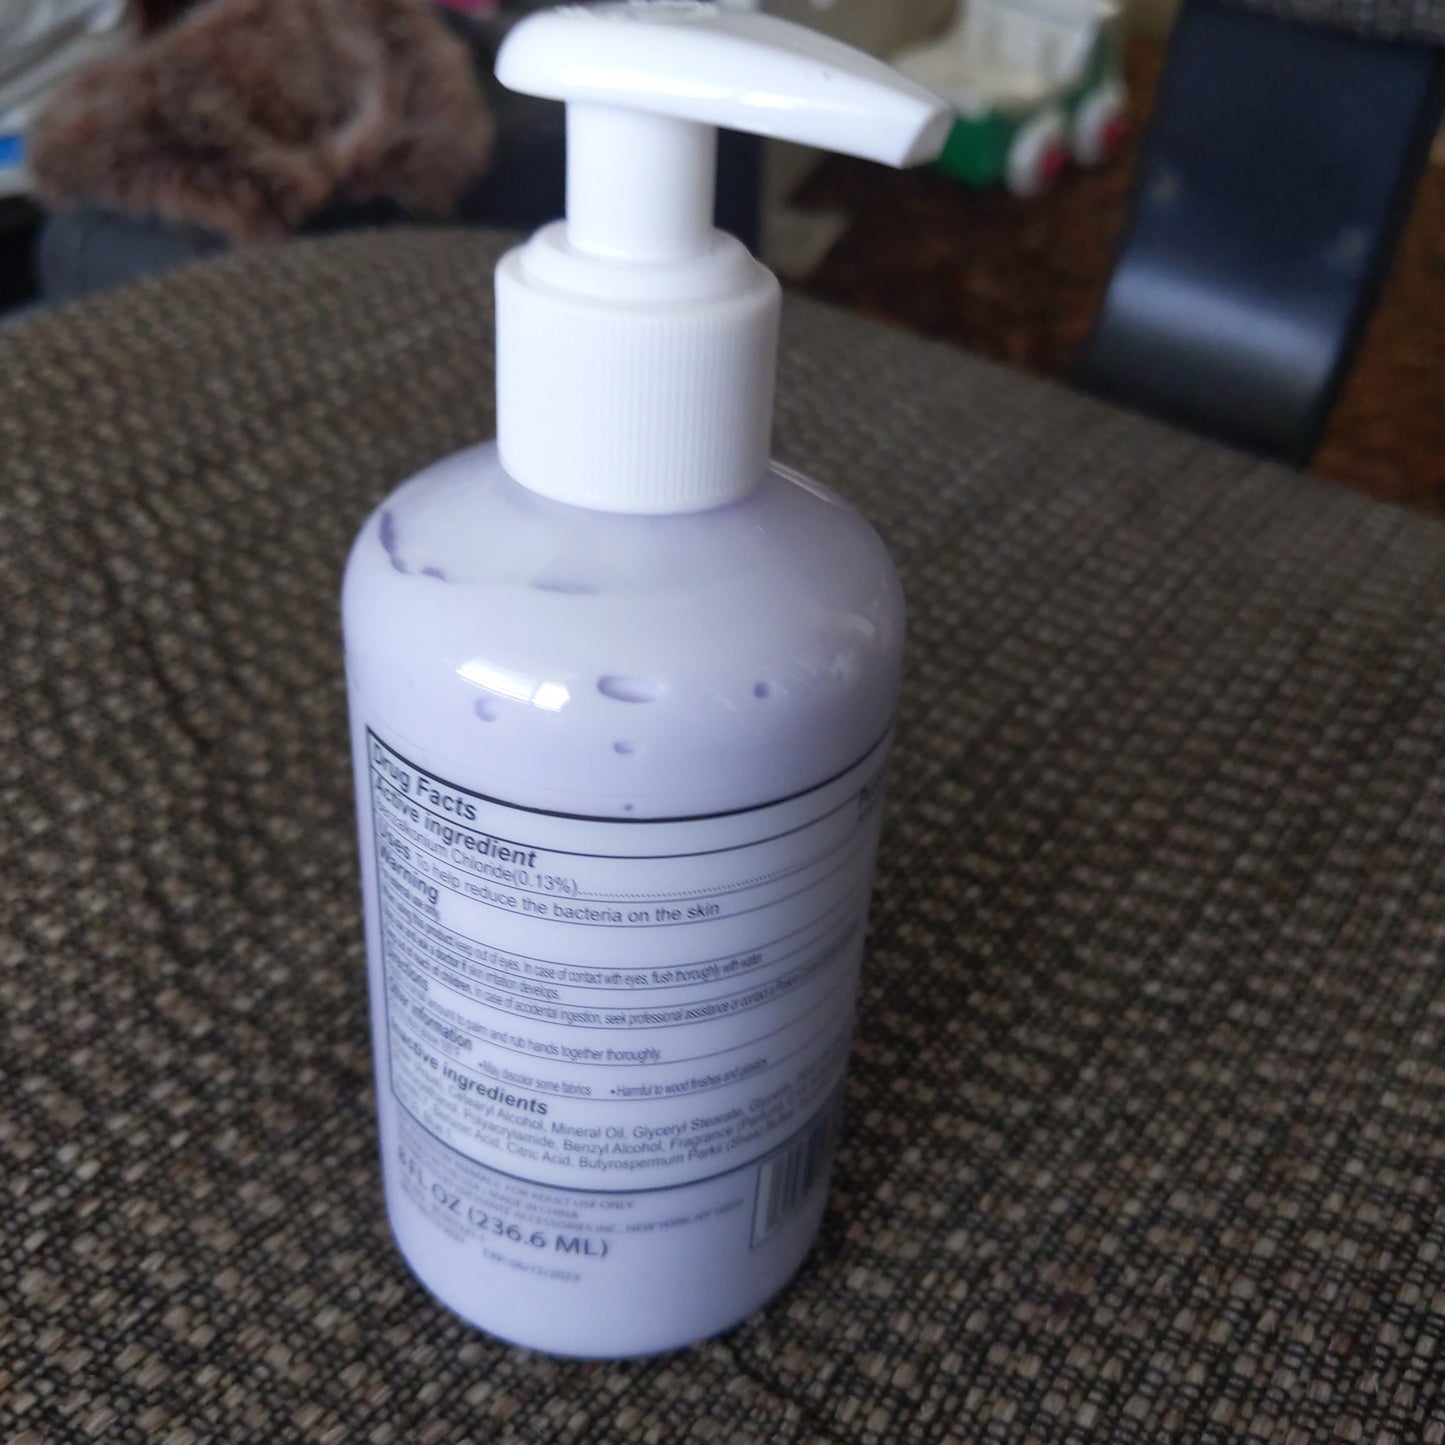 Anti-Bacterial Hand Lotion